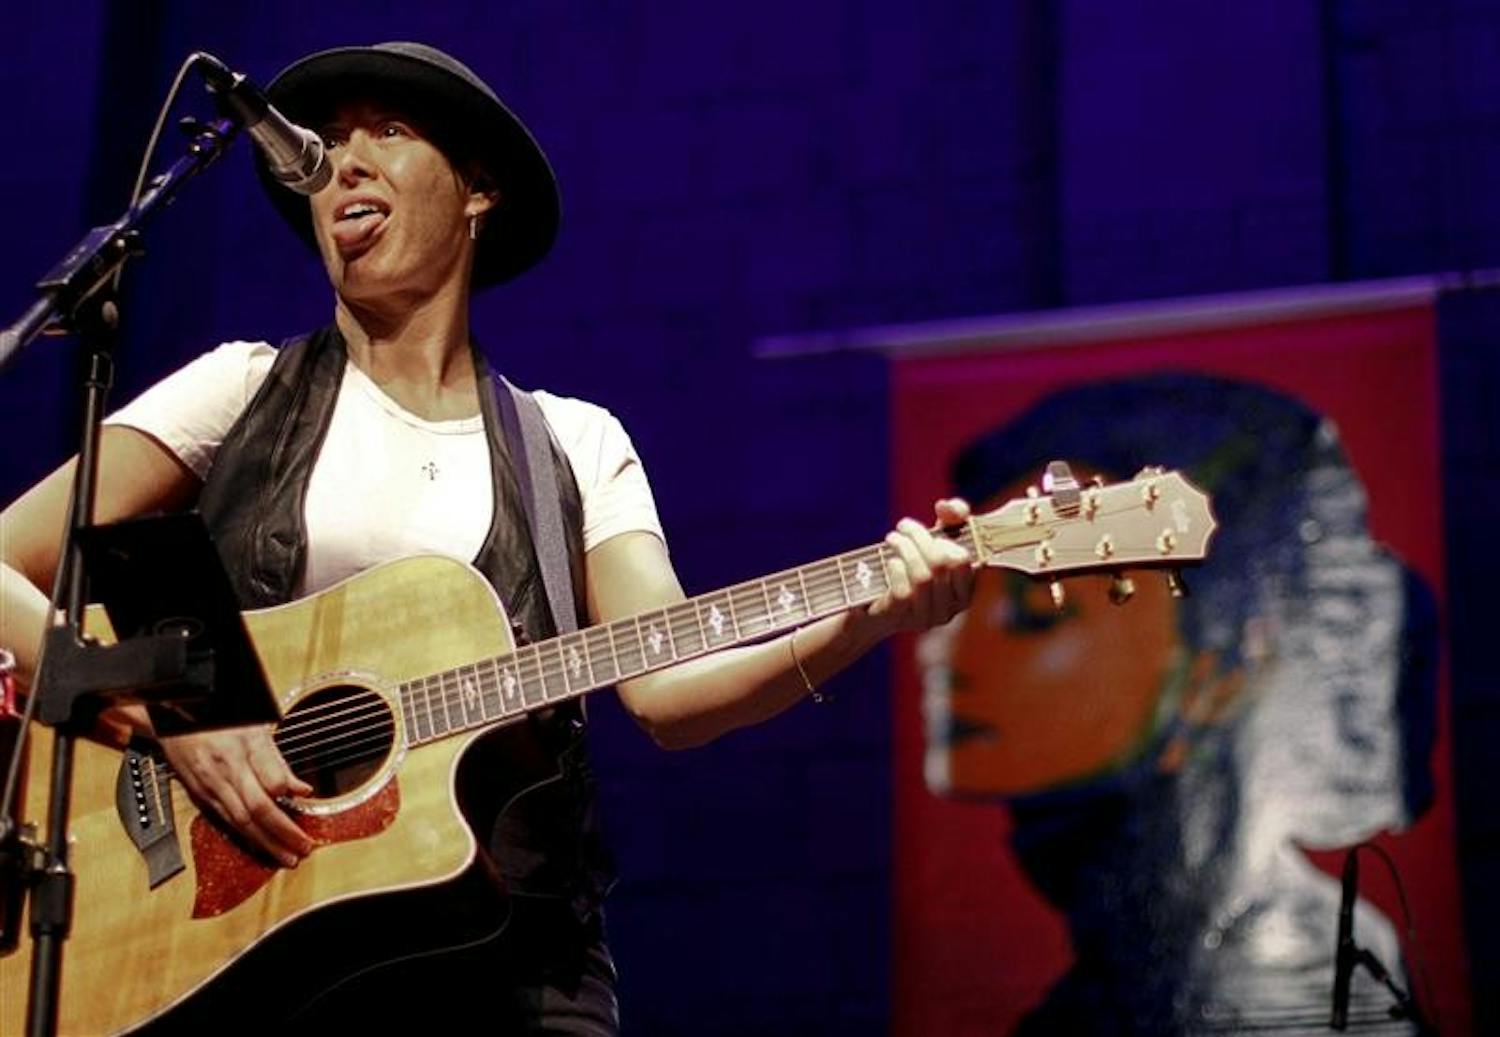 Michelle Shocked performs Saturday evening at the Buskirk Chumley Theater. Shoked's stage featured a painting of Audrey Hepburn in the background. and in between songs called the painter to talk to him about it, but got his voice mail the first time.